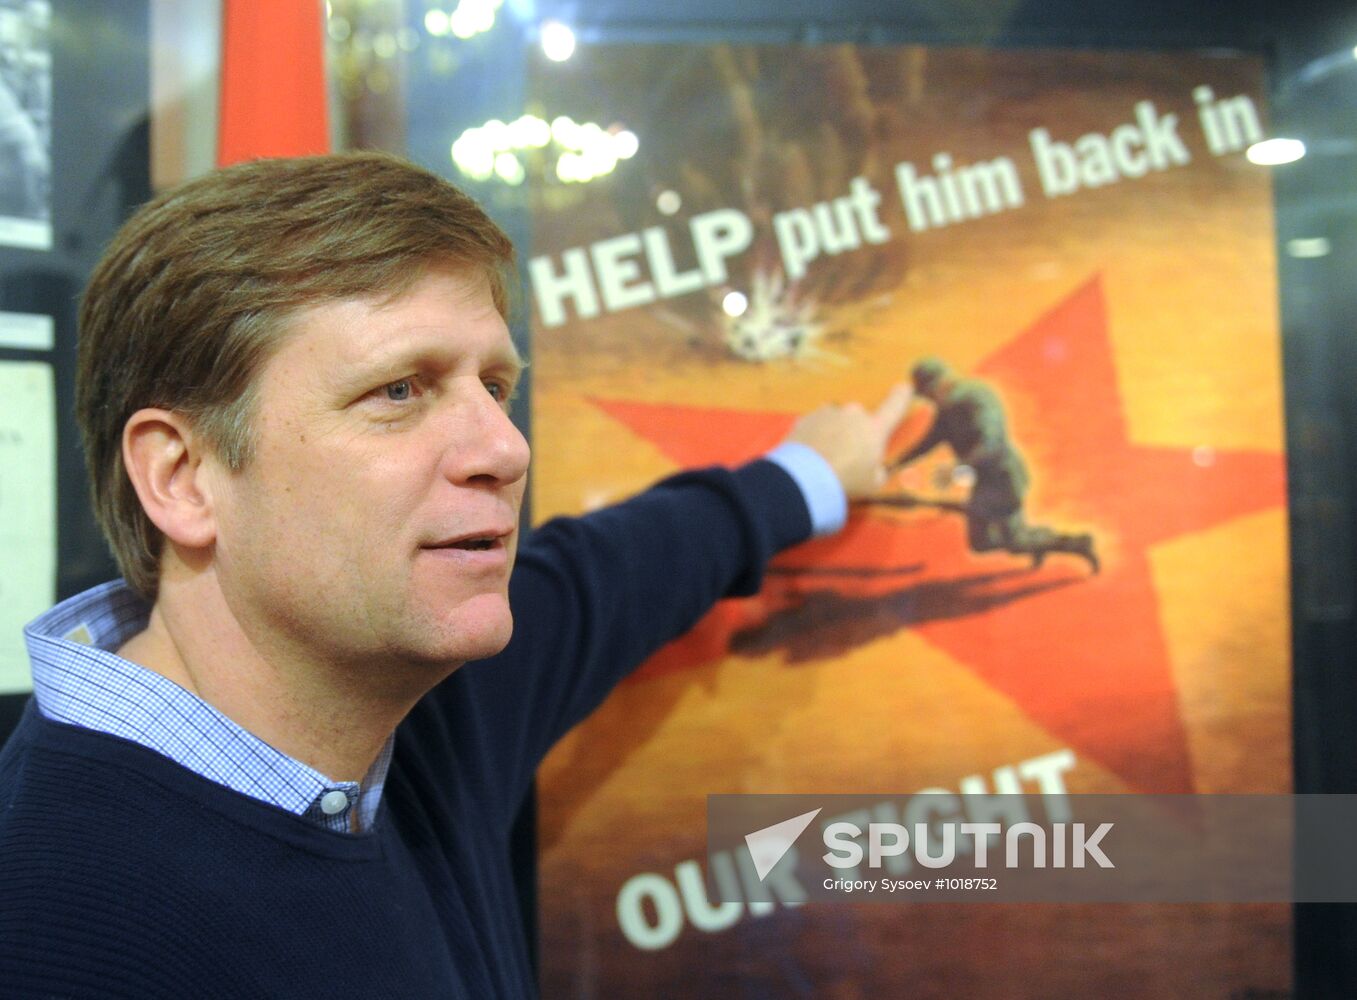 Newly-appointed US Ambassador to Russia Michael McFaul